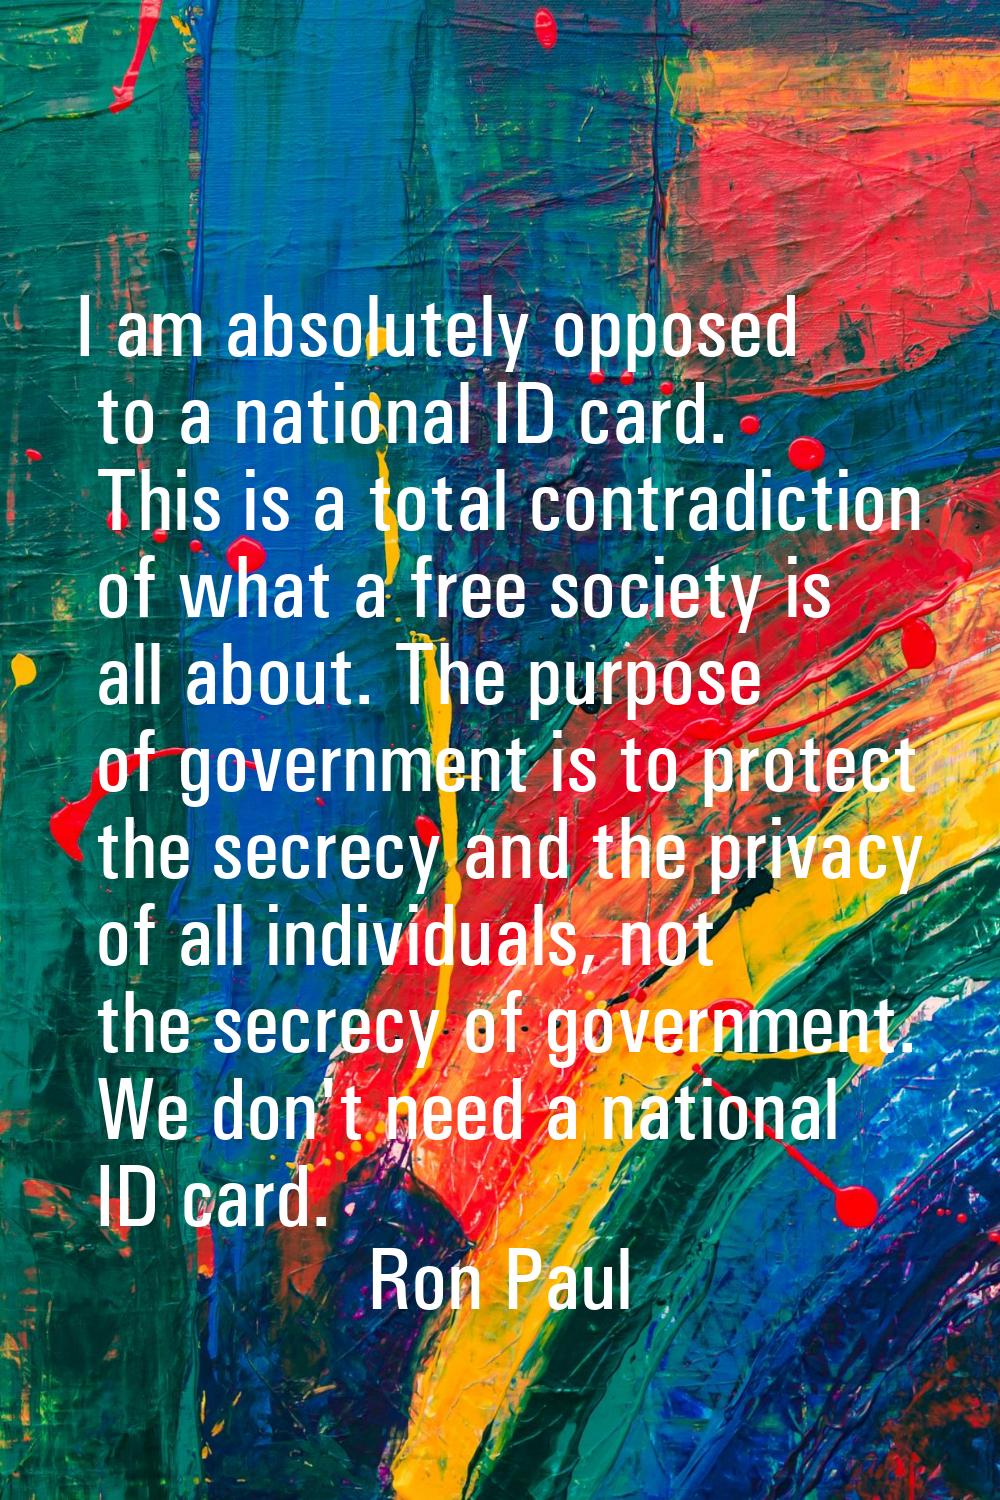 I am absolutely opposed to a national ID card. This is a total contradiction of what a free society